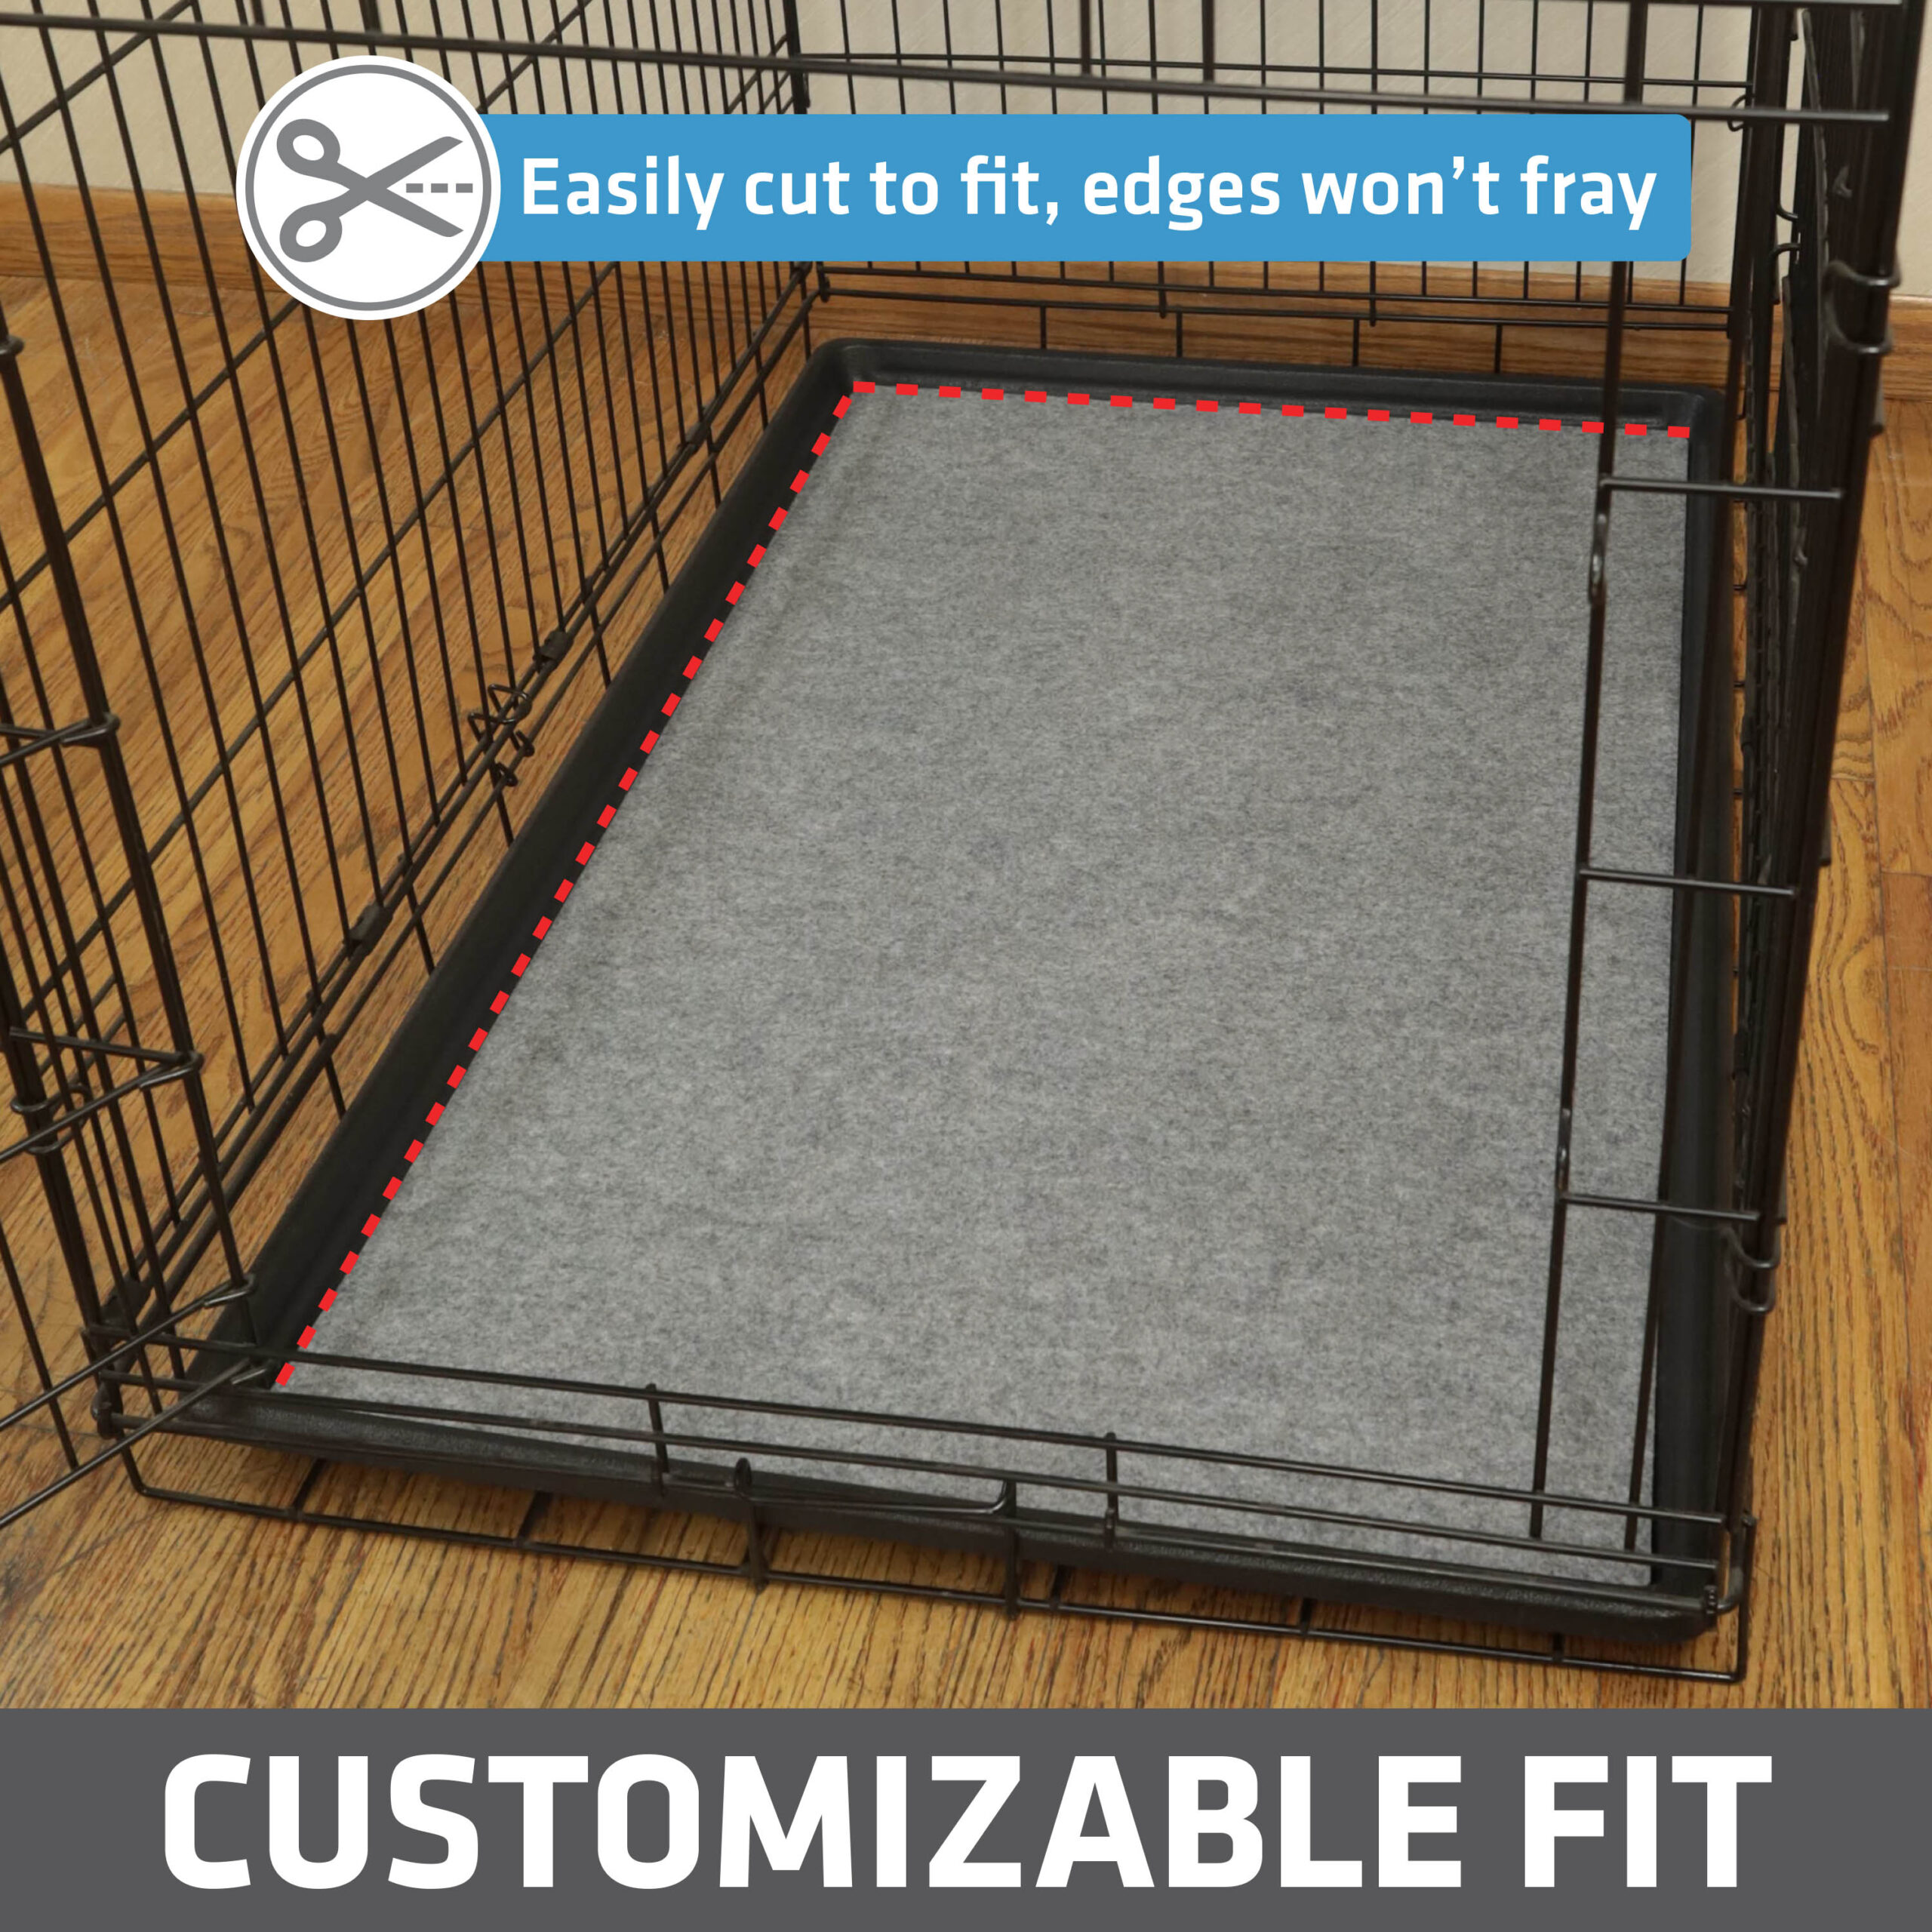 Drymate XL Litter Trapping Mat - RPM Drymate - Surface Protection Products  for Your Home